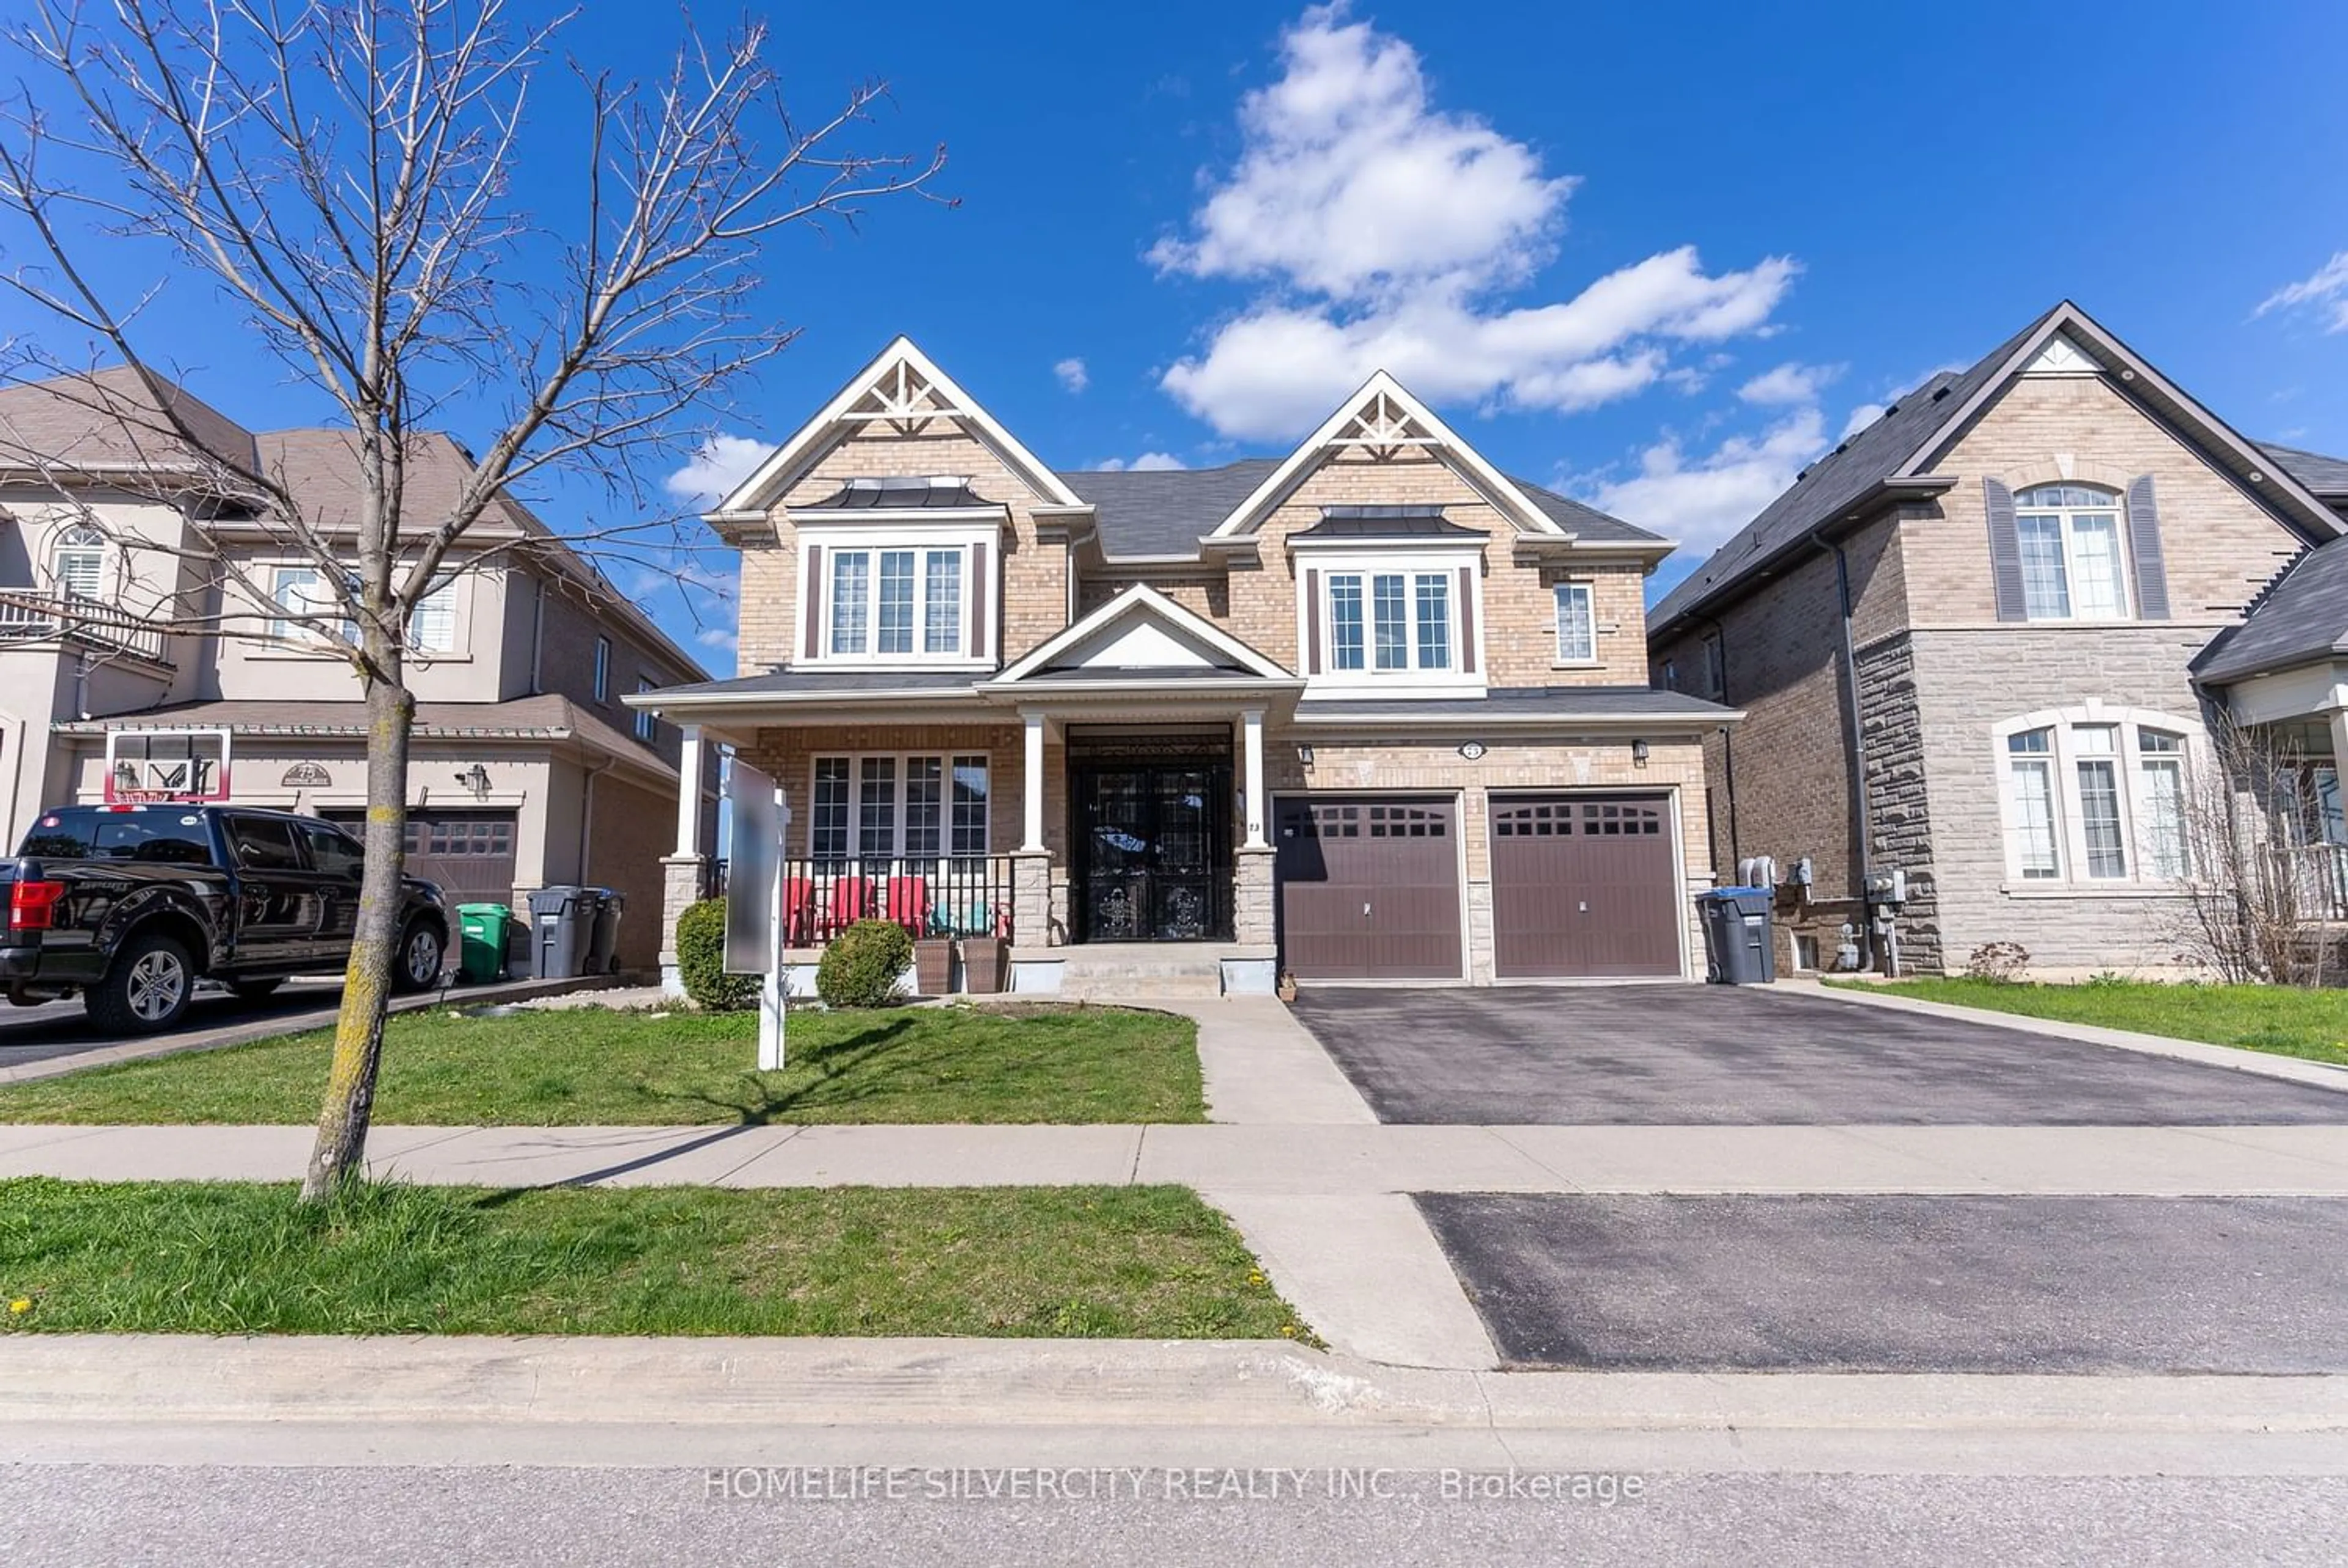 Frontside or backside of a home for 73 Pathway Dr, Brampton Ontario L6X 0Z2